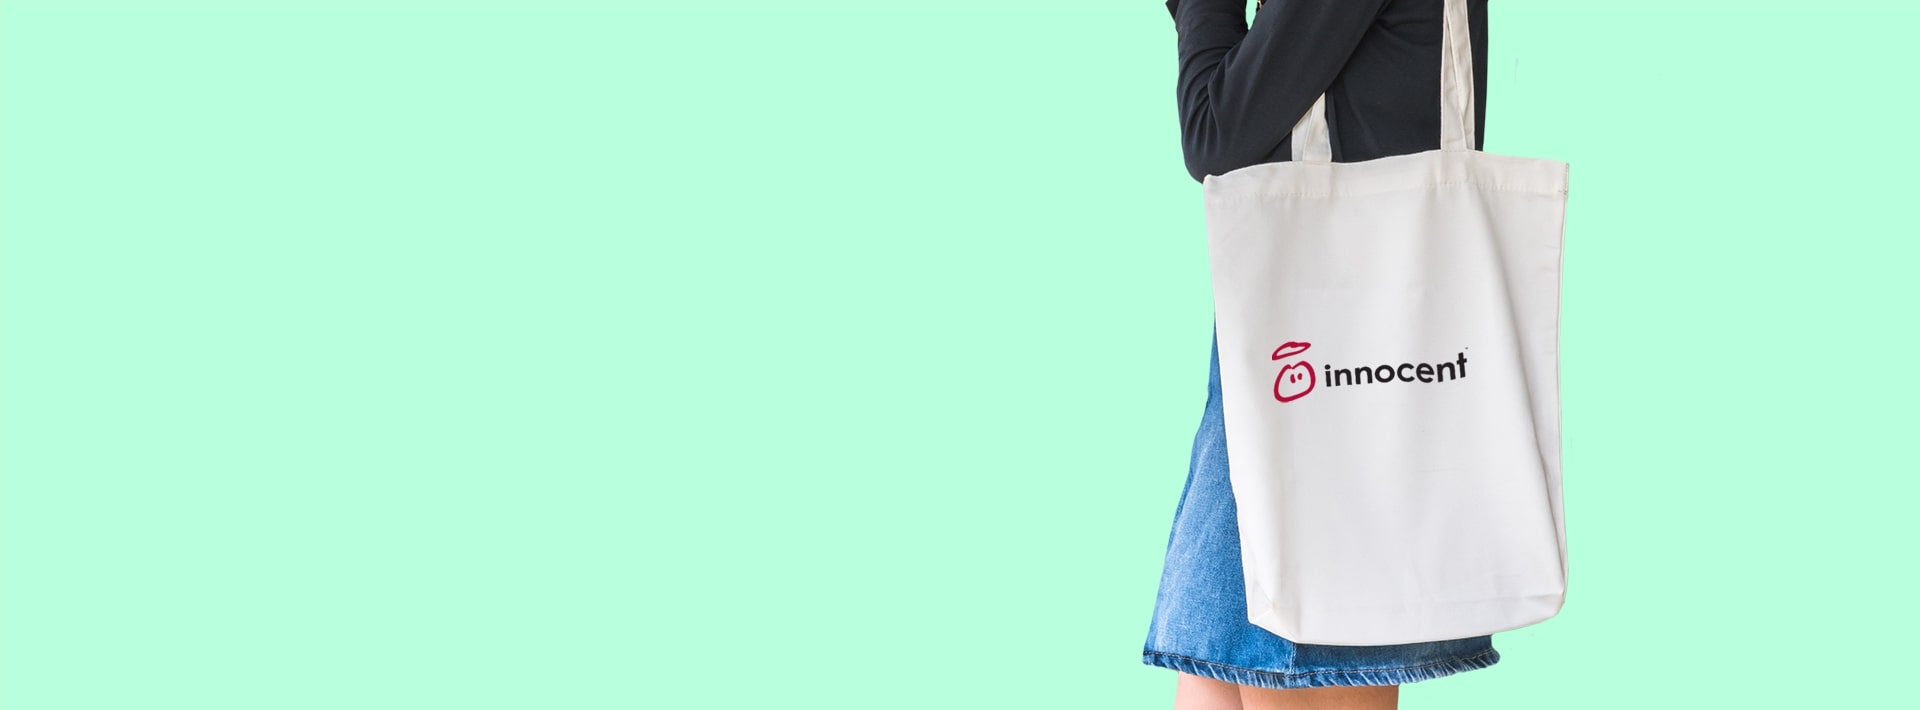 100% Custom Branded<br>
Eco-friendly and ethically sourced bags